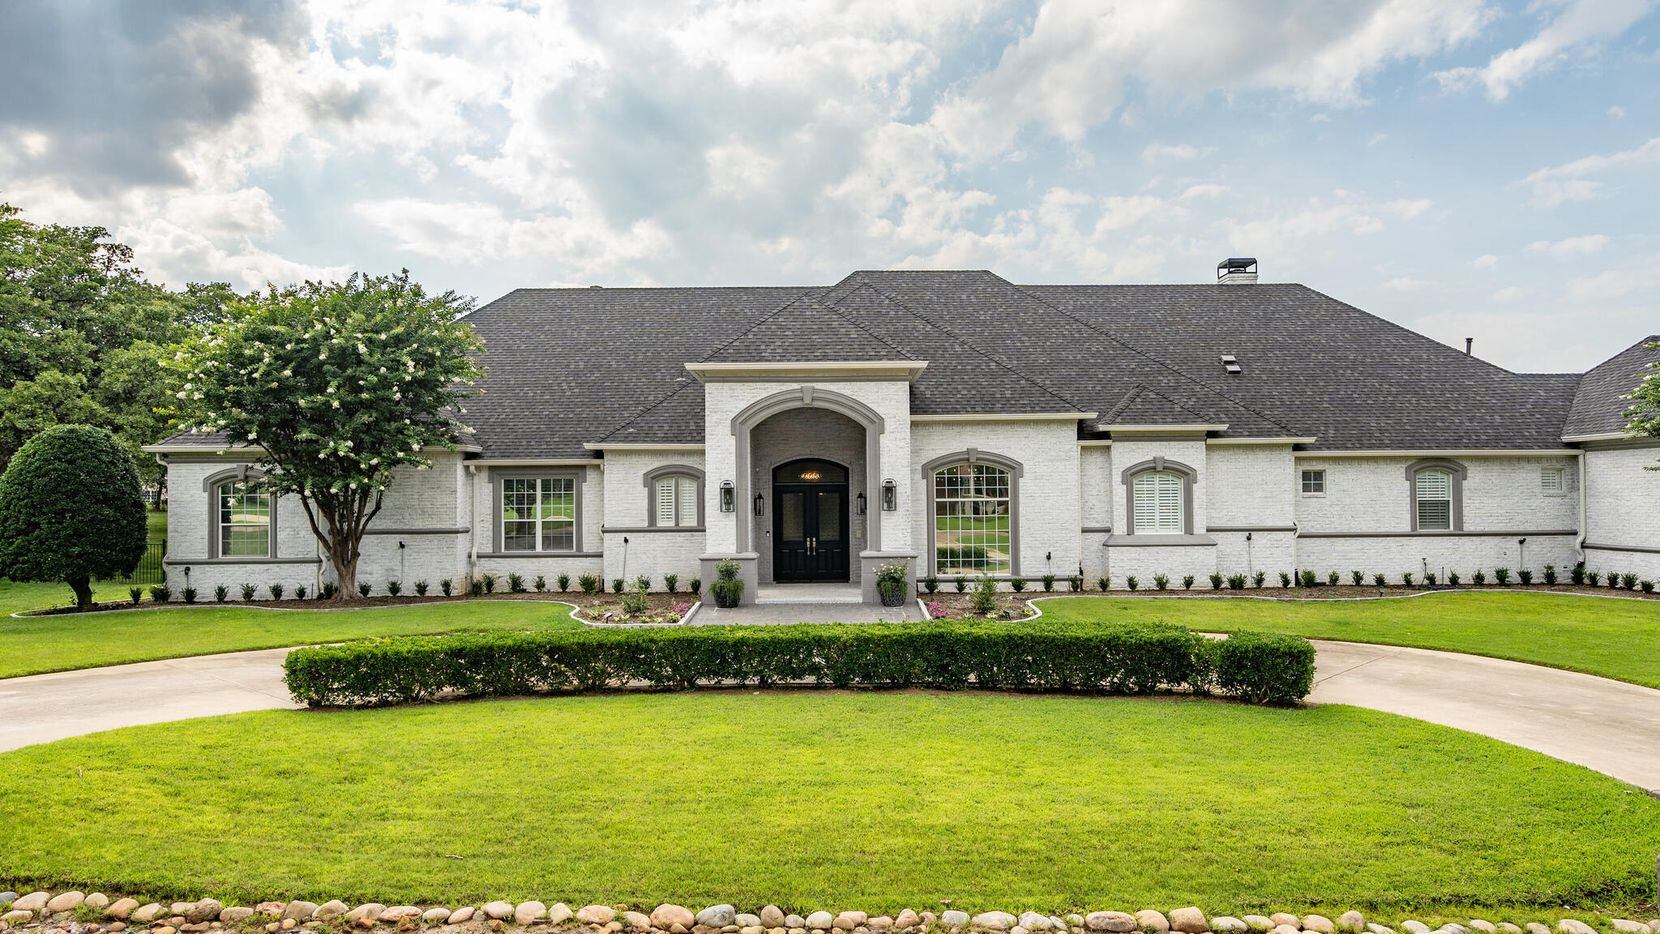 Take a look at the home at 5809 Southern Hills Drive in Flower Mound.